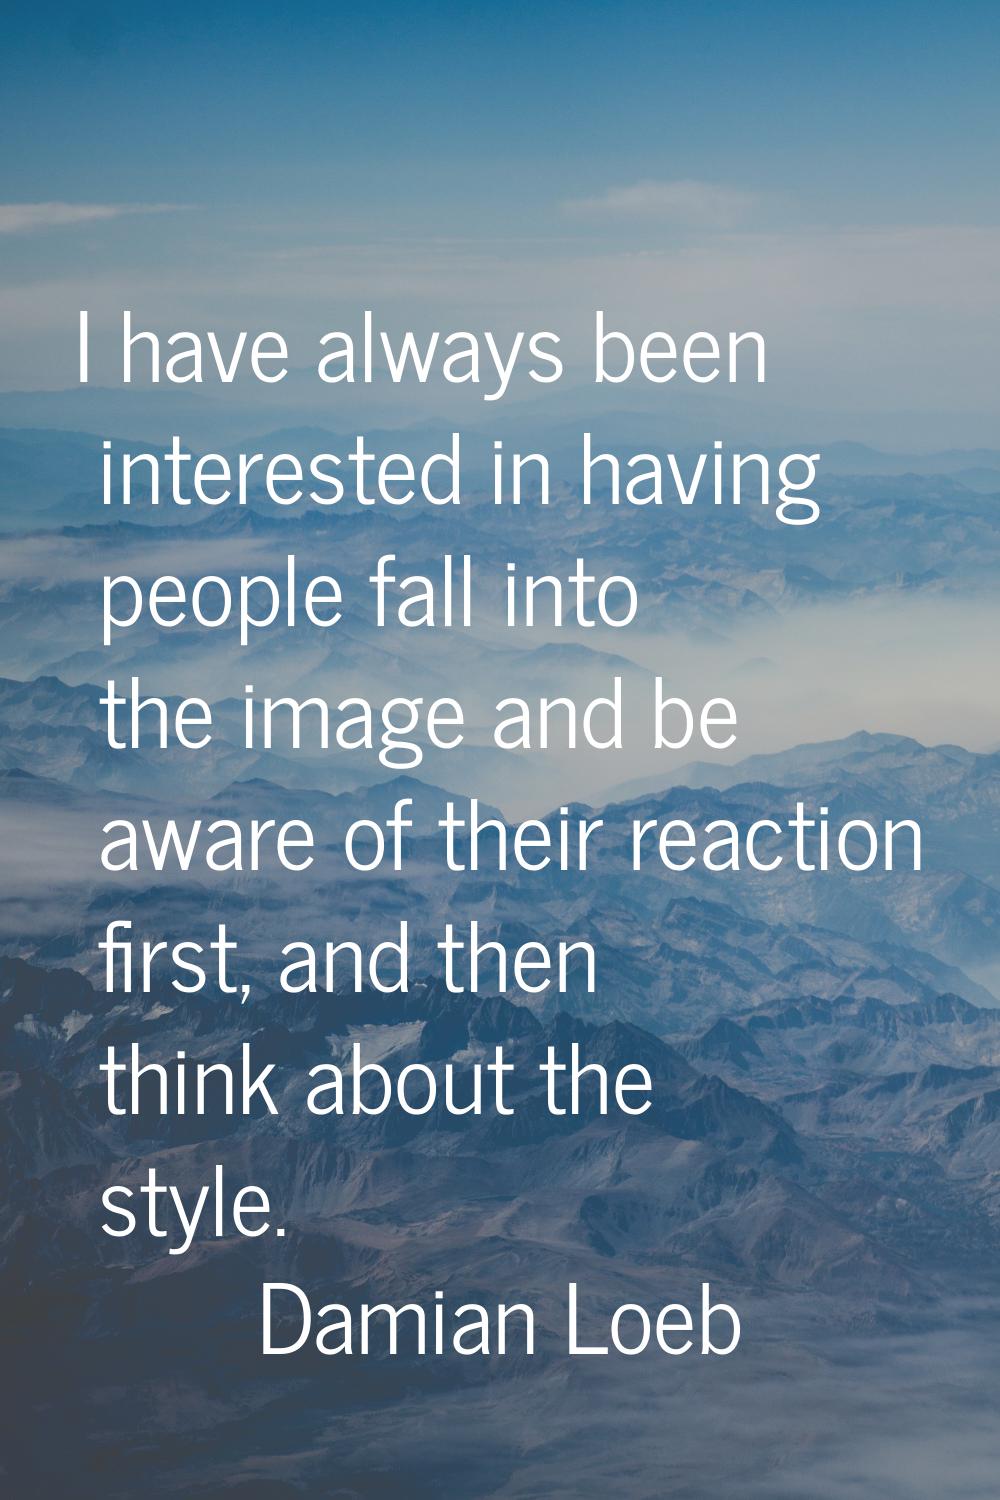 I have always been interested in having people fall into the image and be aware of their reaction f